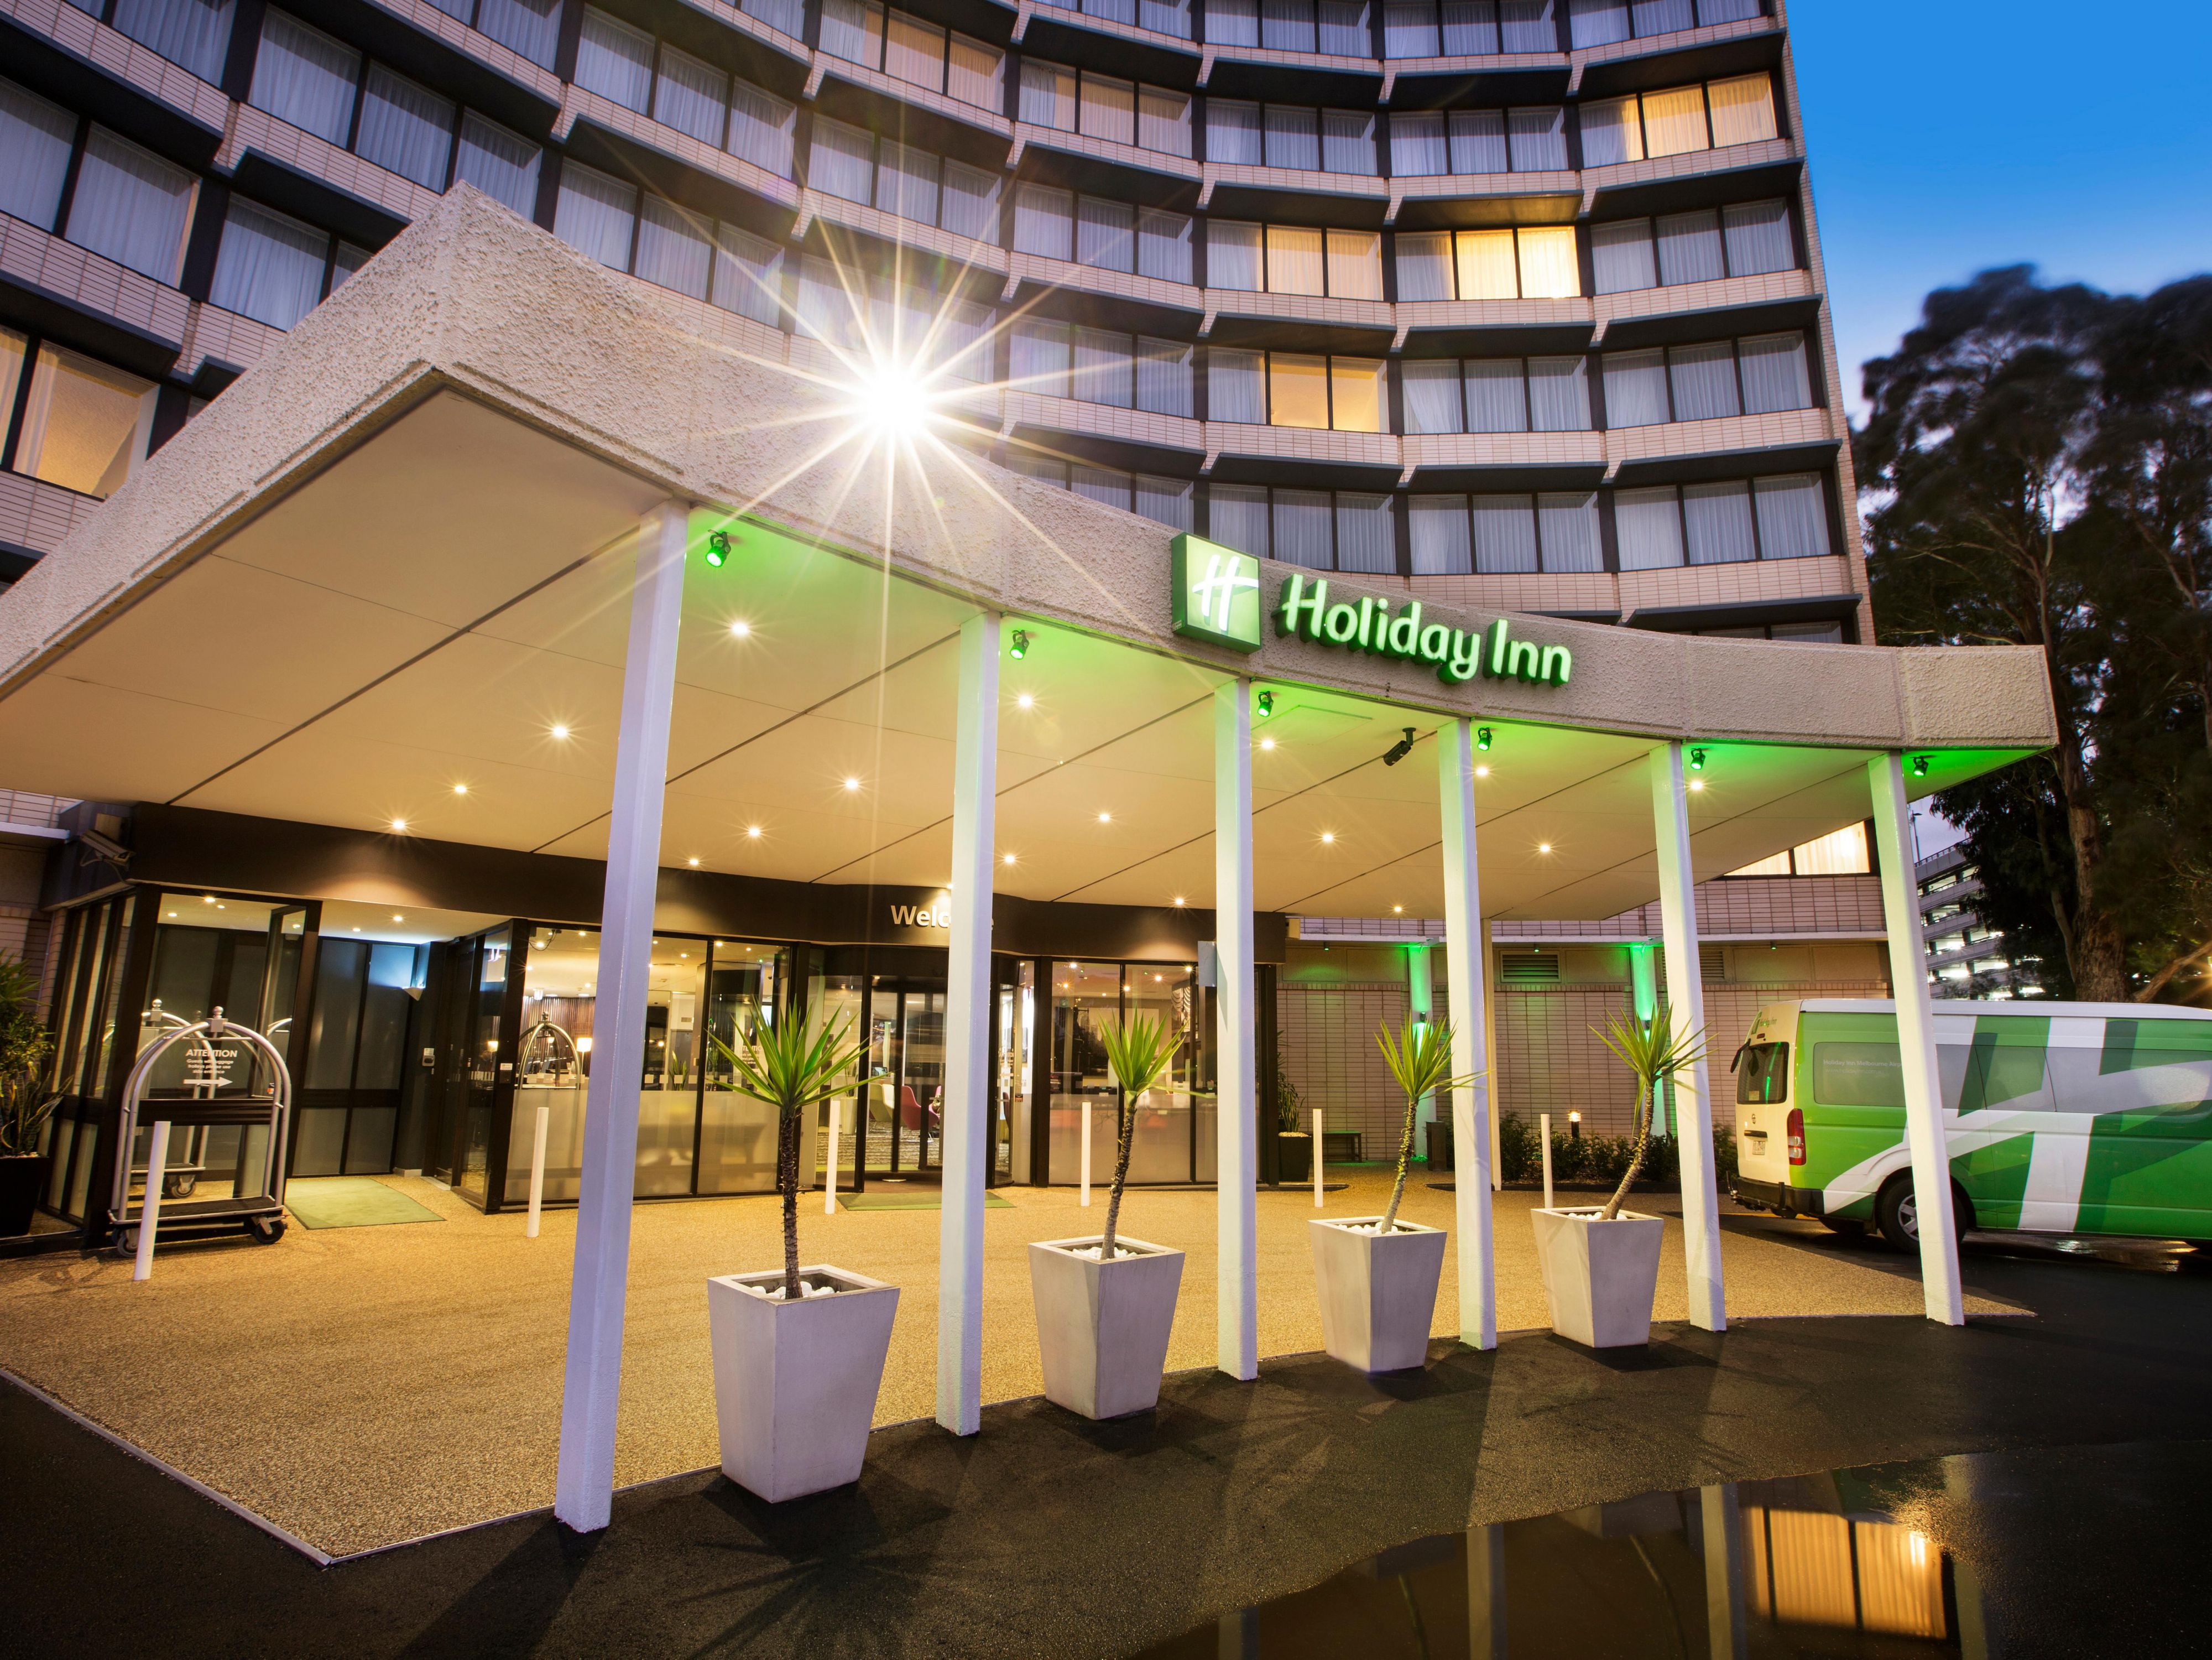 Battle less of the traffic and worry less about being on time to your flight when you stay the night at Holiday Inn Melbourne Airport. We are located across the road from Melbourne Airport (400m).